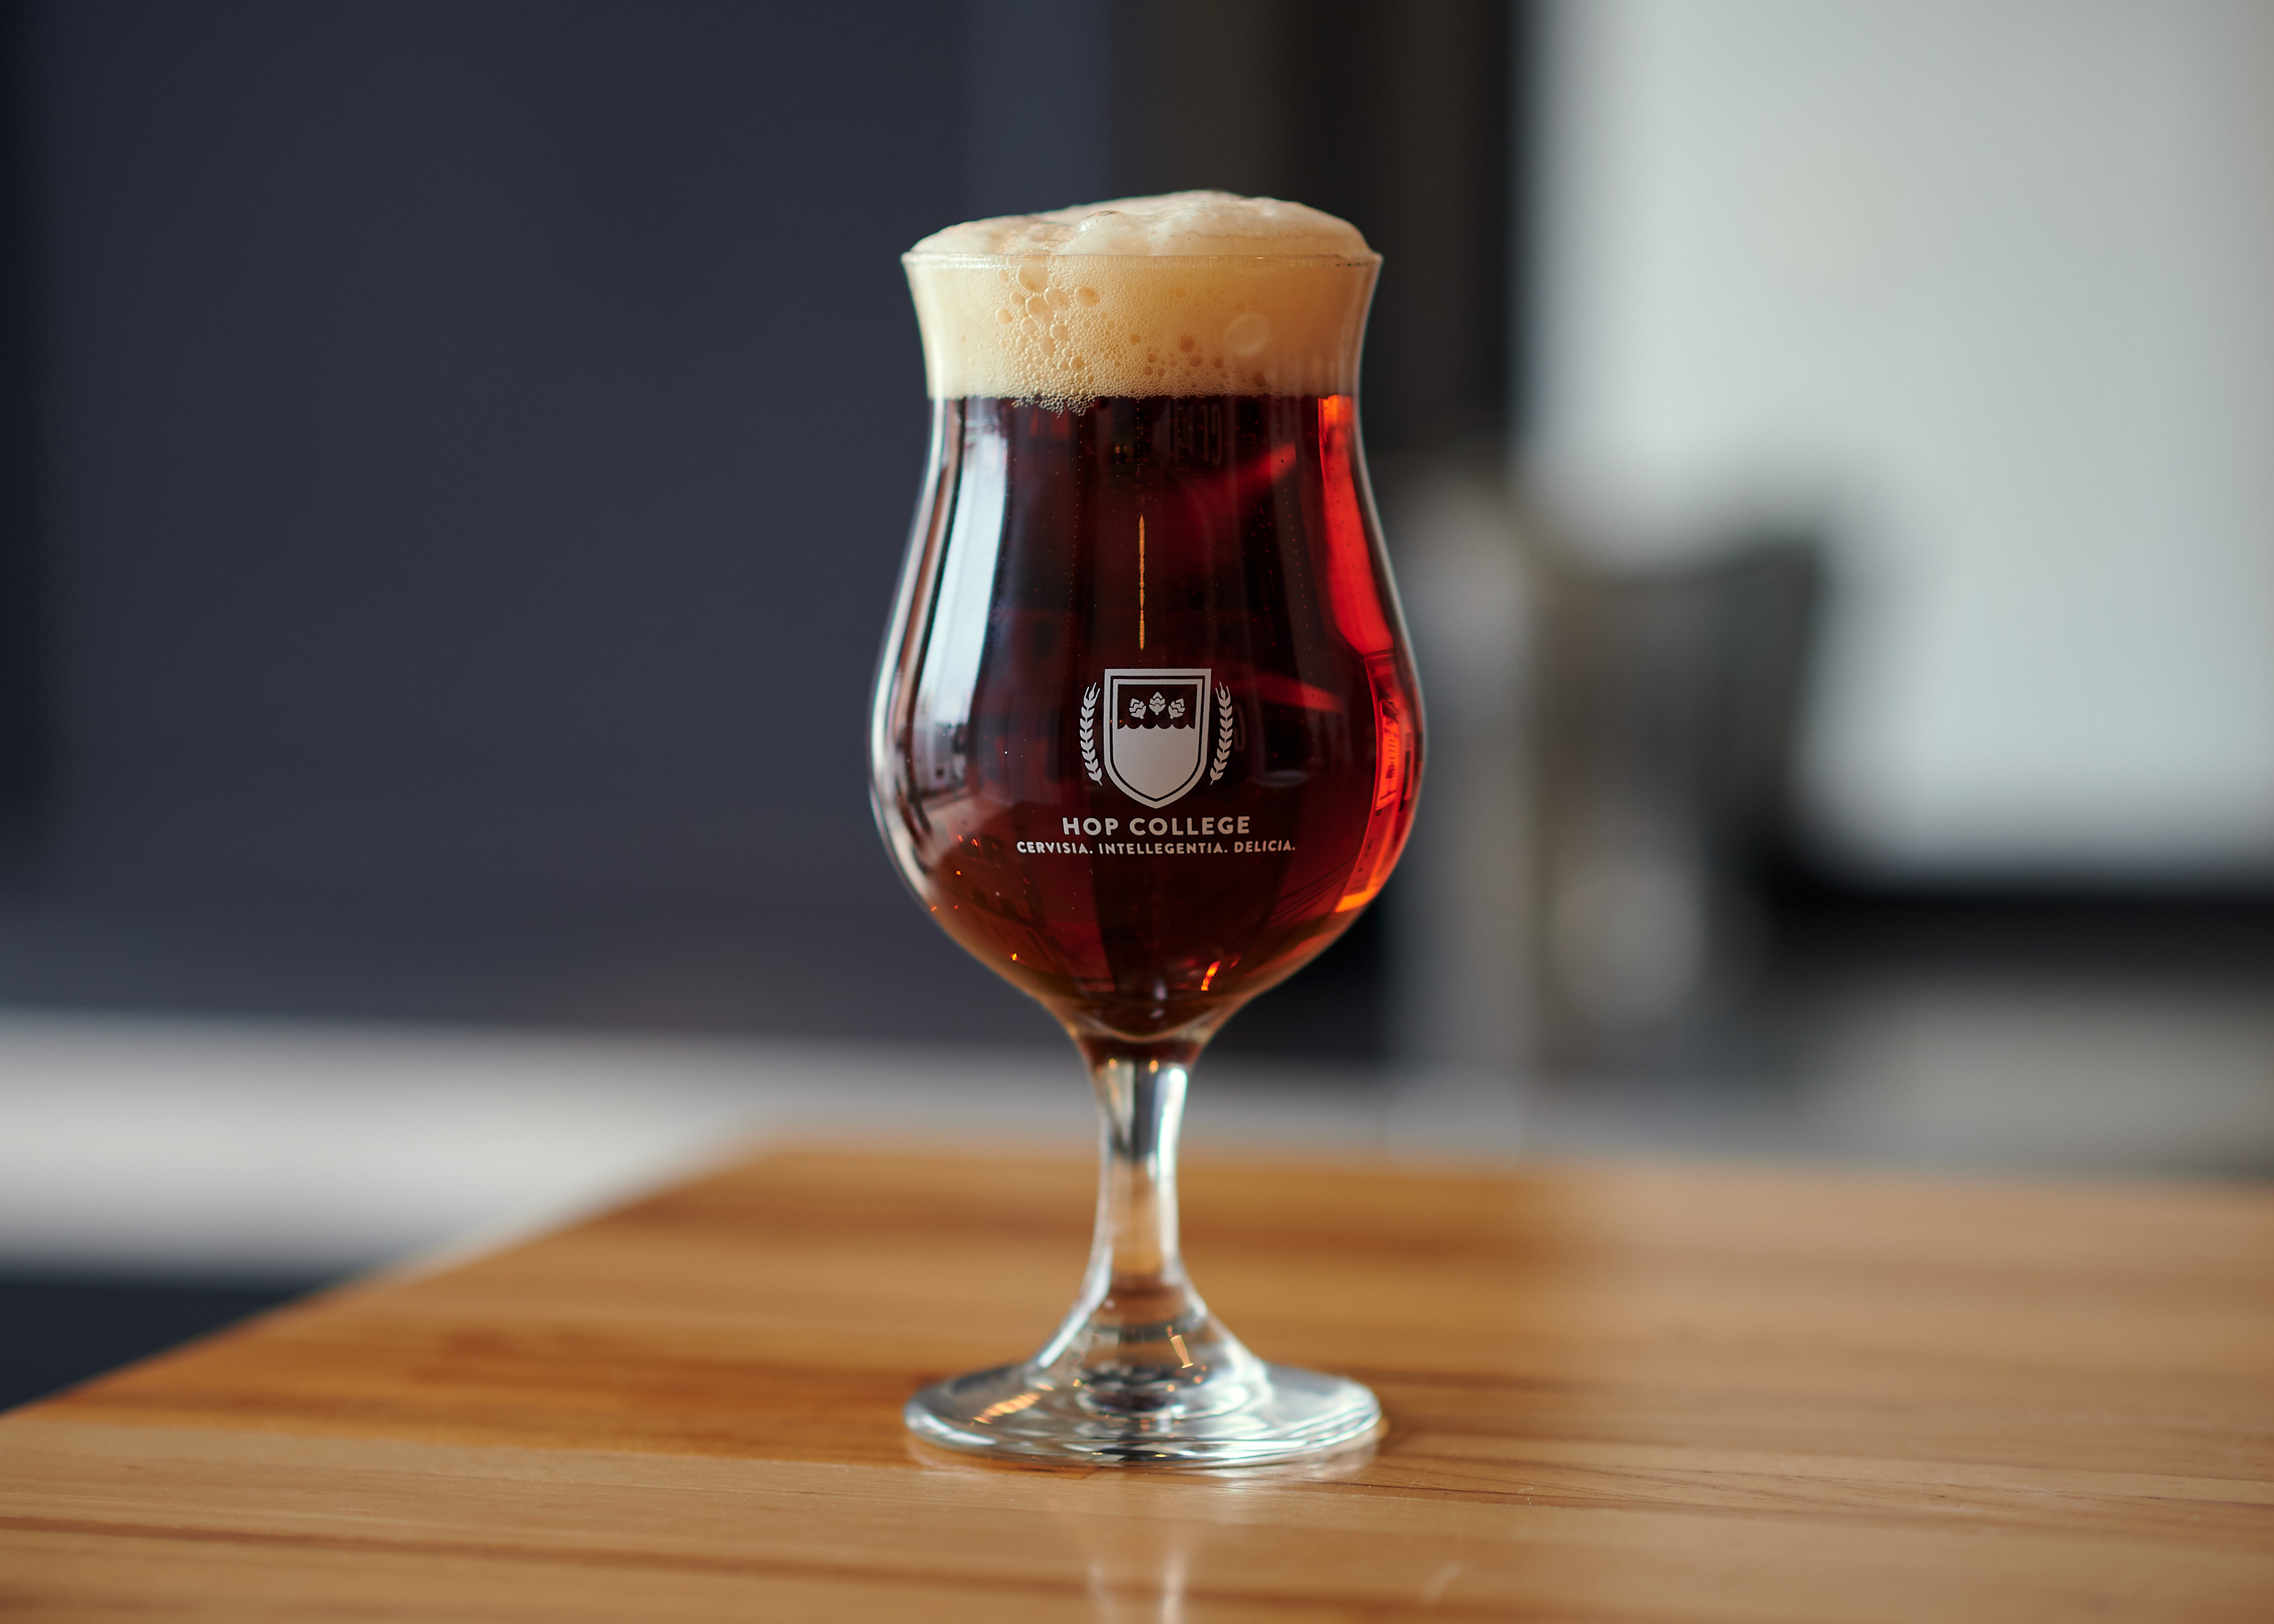 GLBC Hop College tulip glass filled with an amber colored beer on a wooden bar top.